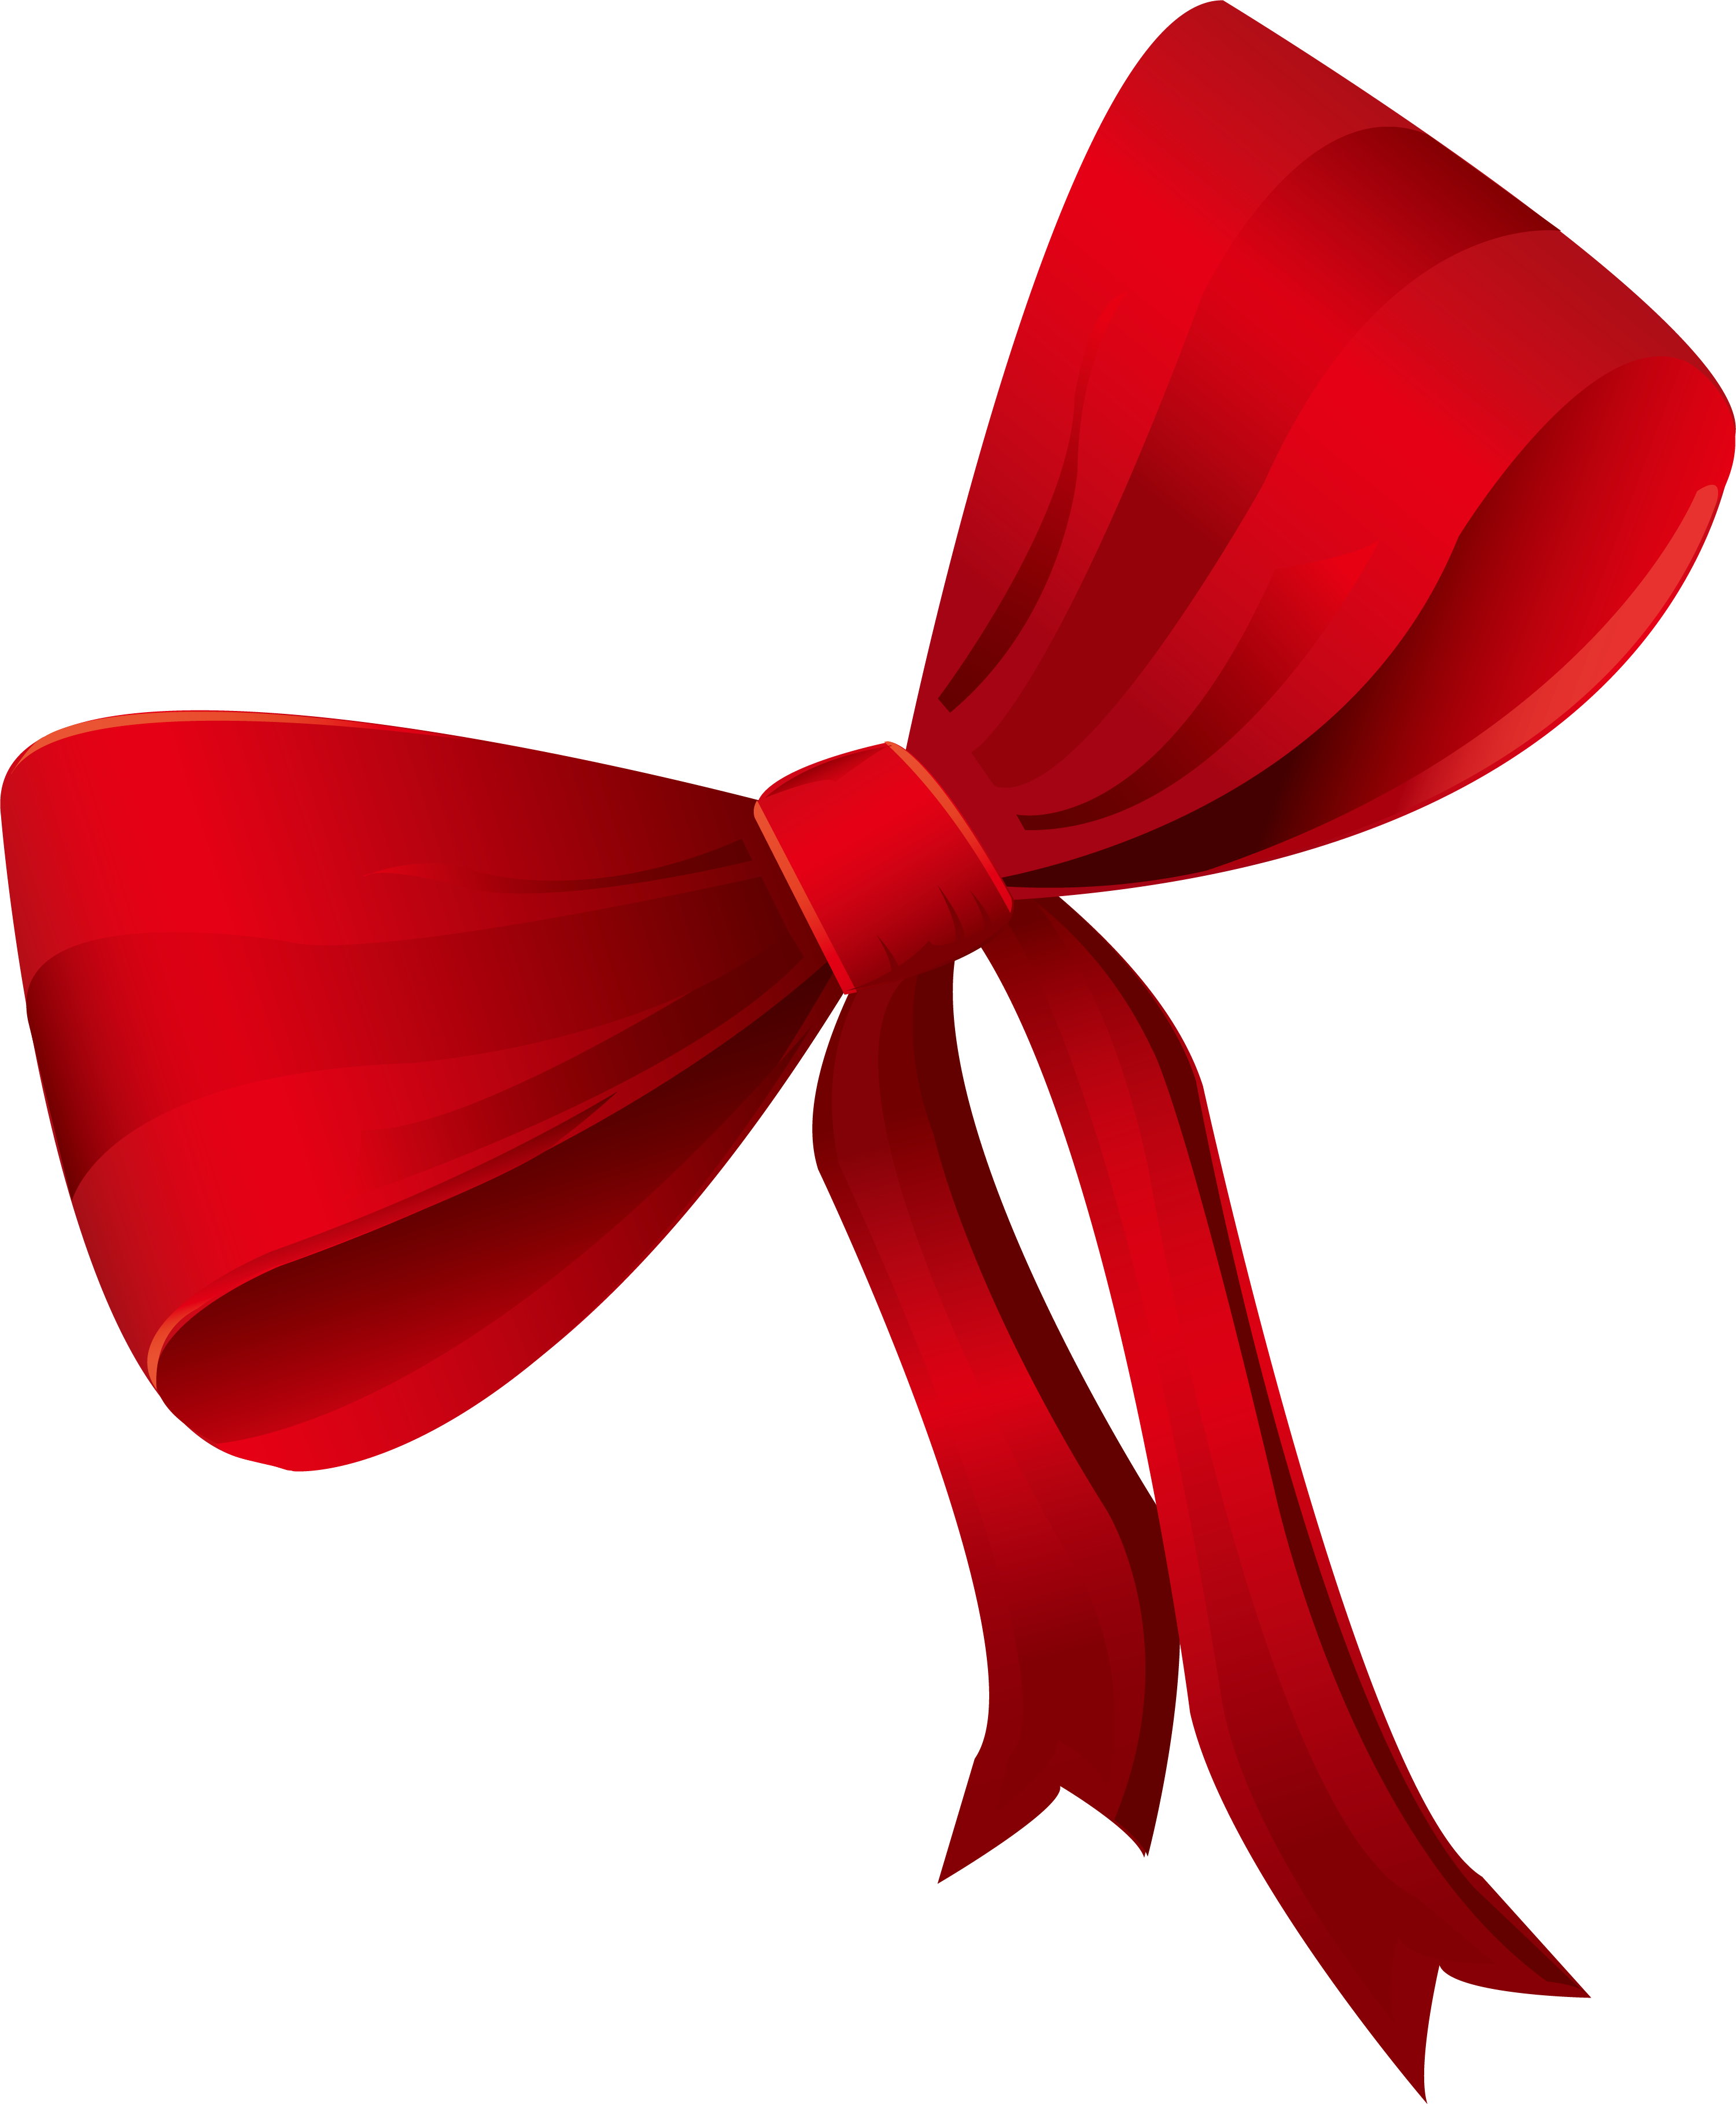 Butterfly Red Bow Tie Shoelace Knot - Red Christmas Ribbon (3001x3637)